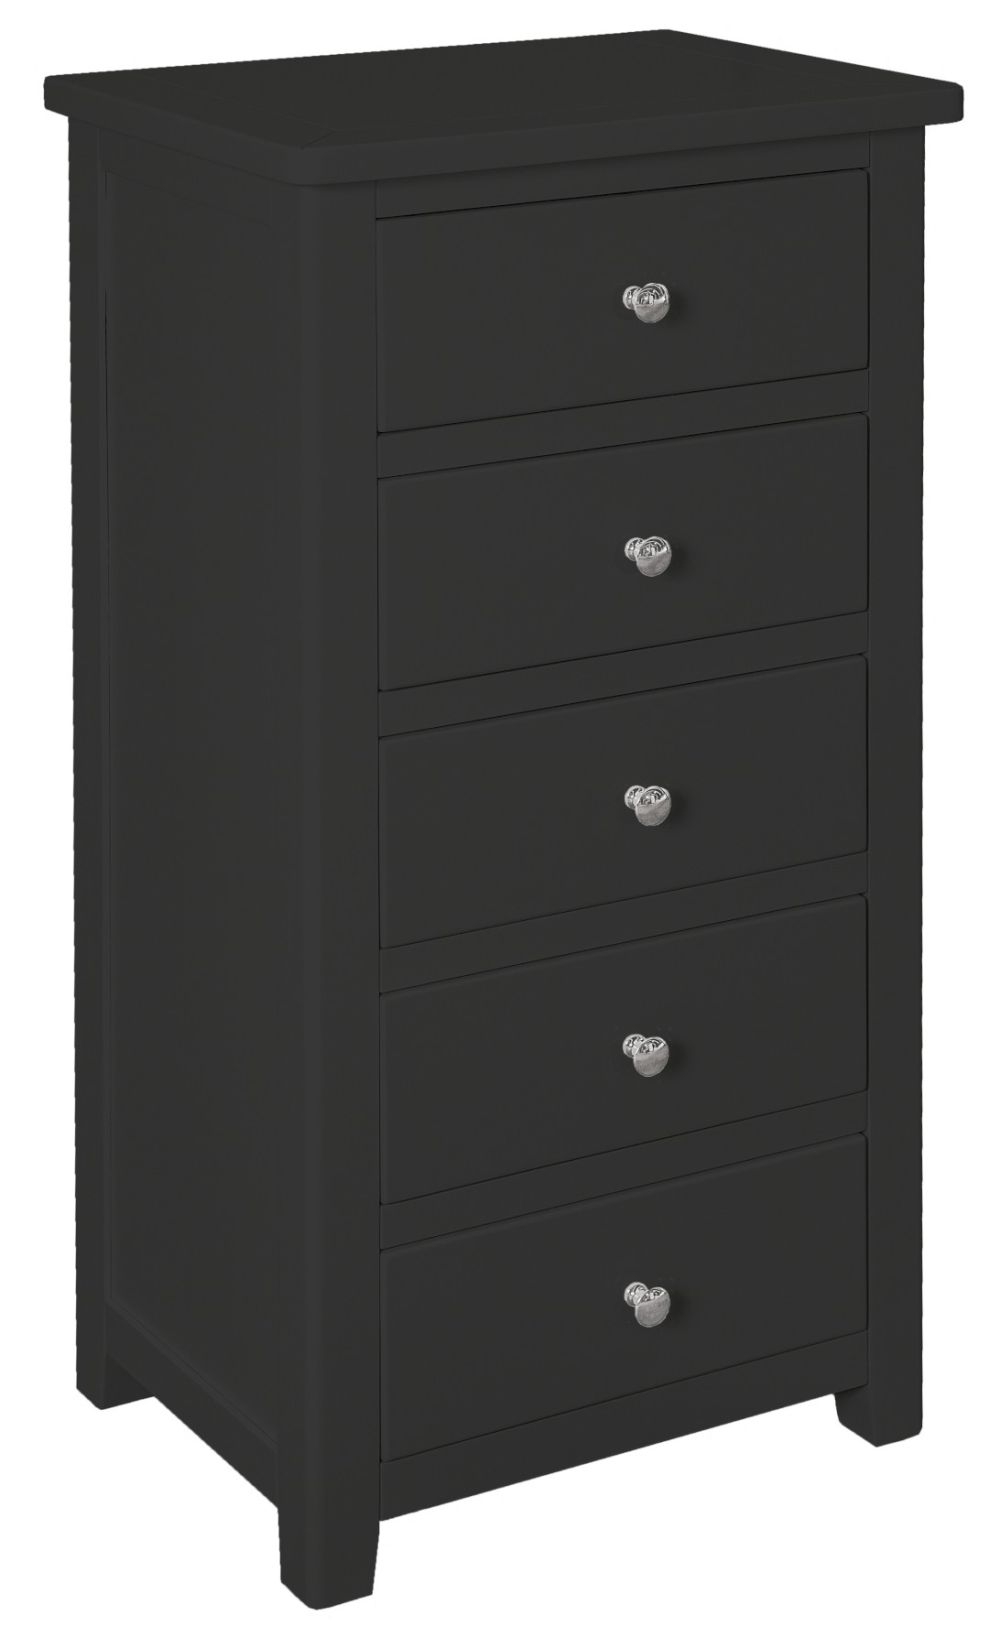 Henley Charcoal Painted 5 Drawer Narrow Chest